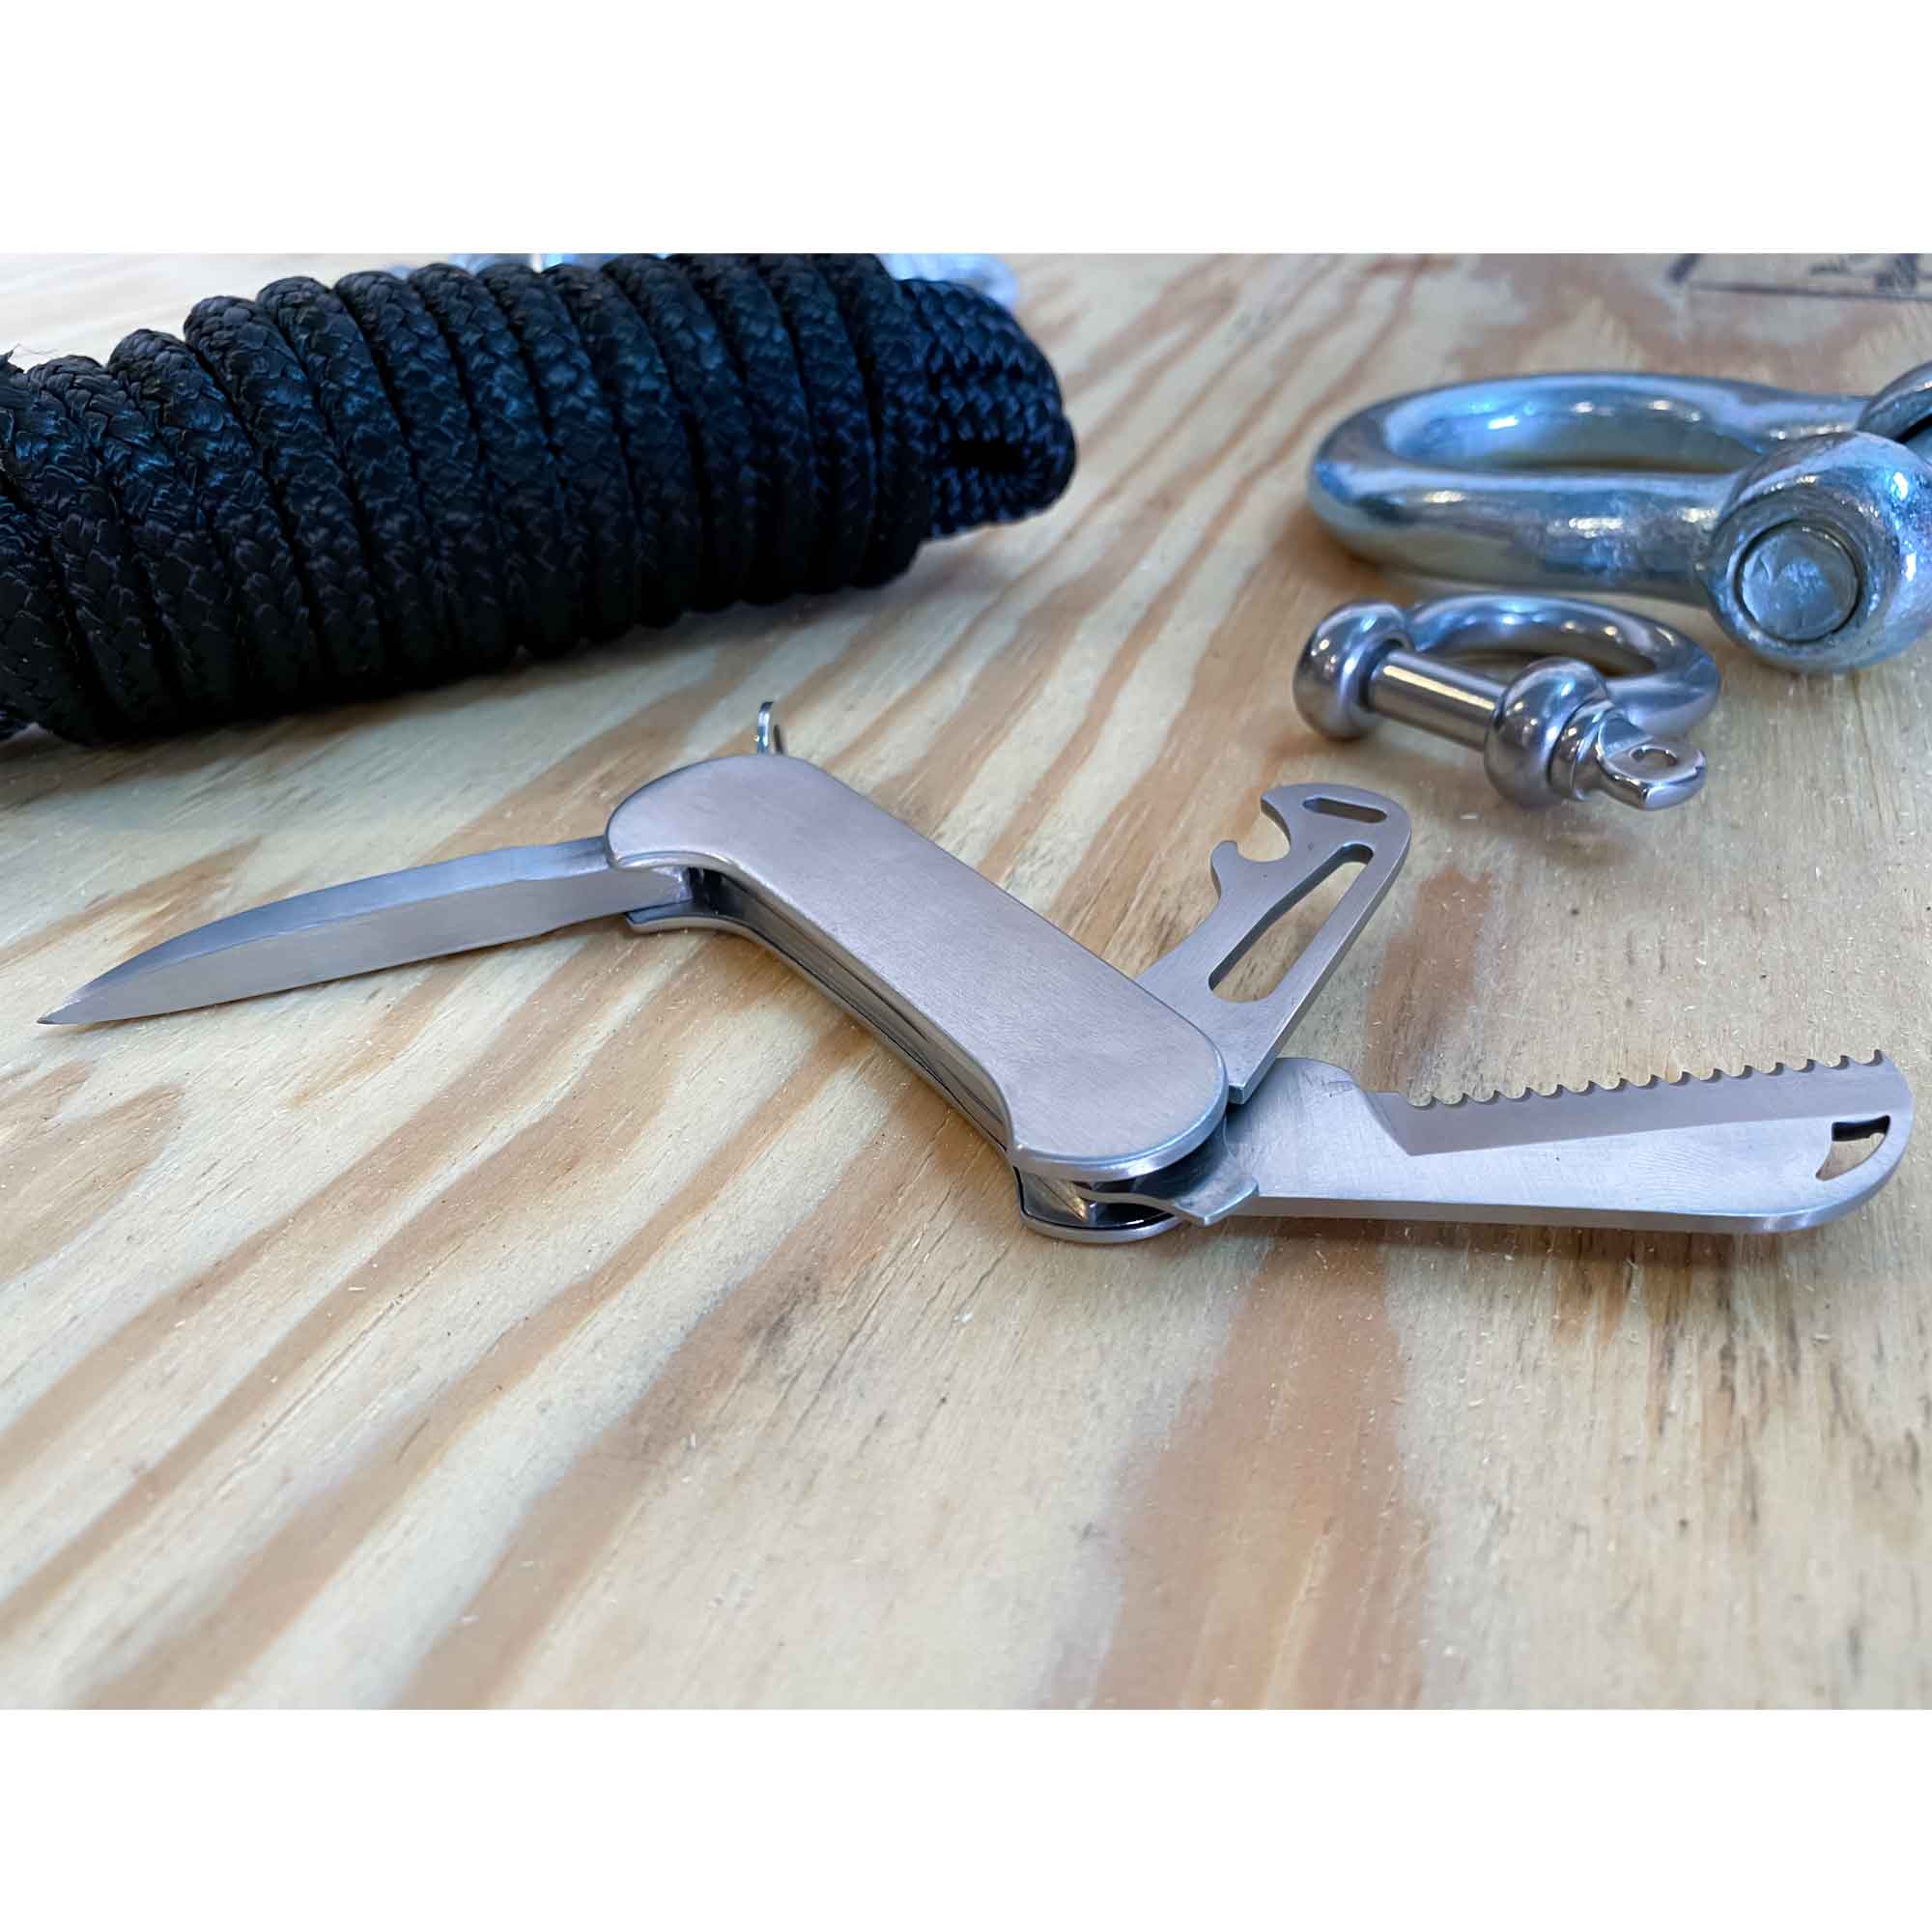 Sailor's Serrated Blade Rigging Knife - FO124